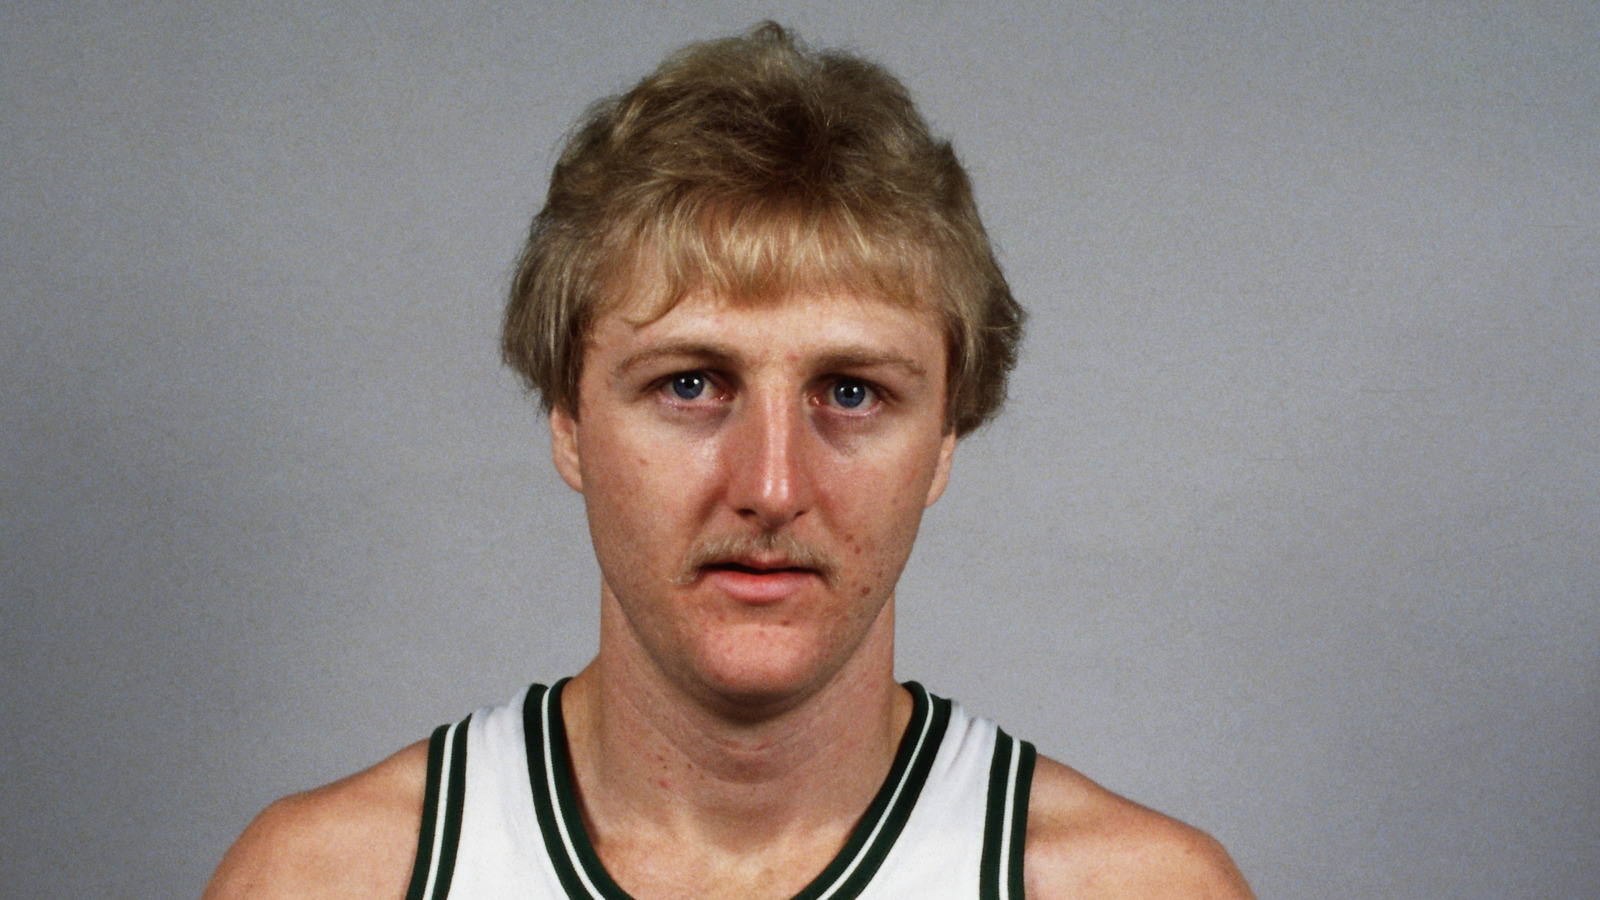 The Real Reason Larry Bird Dropped Out Of Indiana University